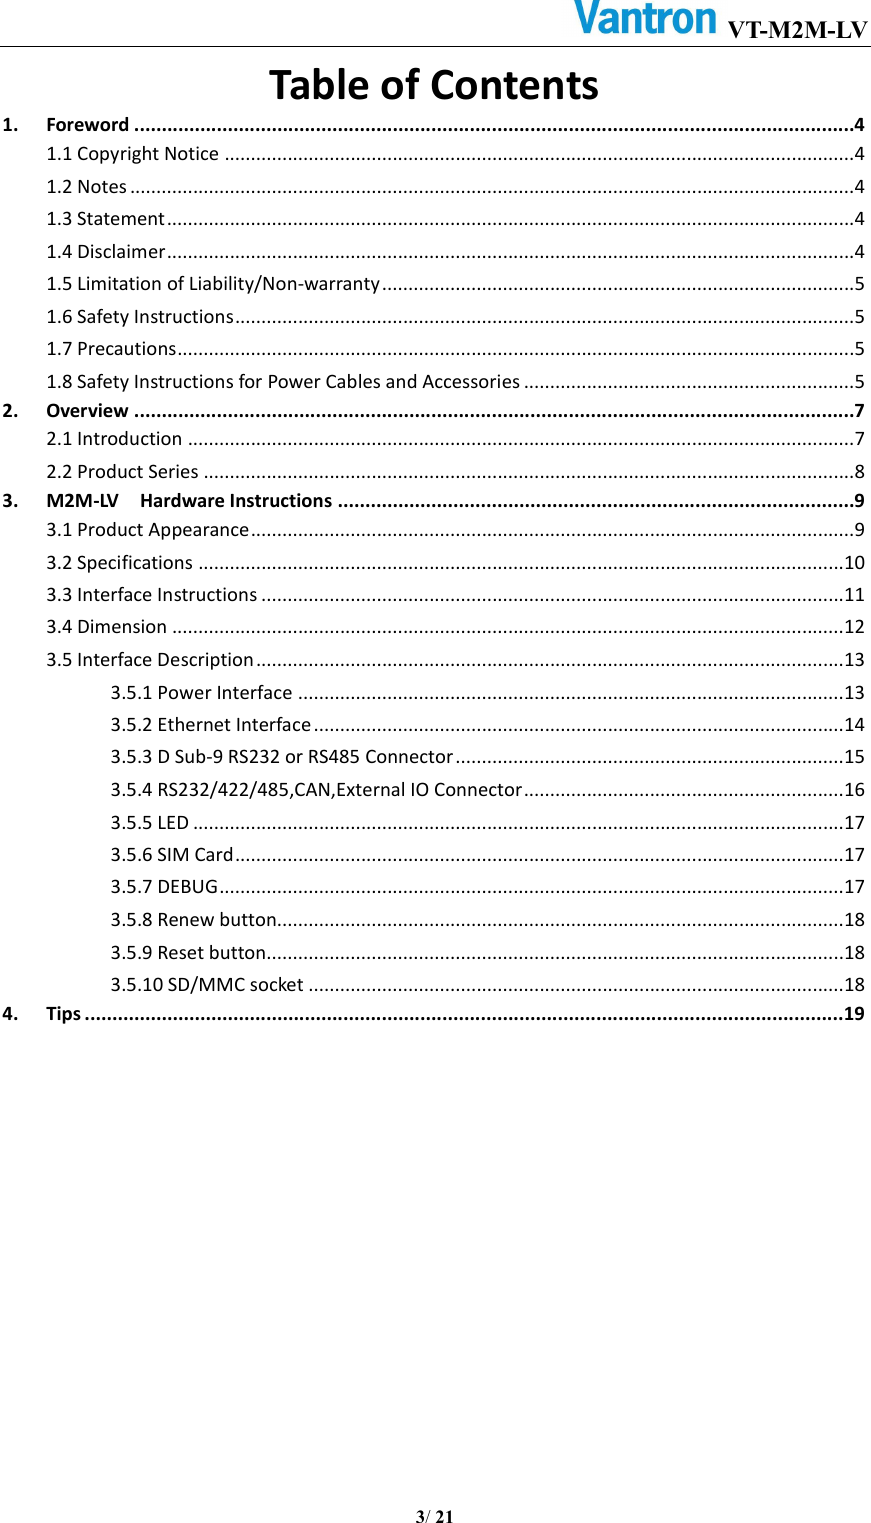 VT-M2M-LV       3/ 21  Table of Contents 1. Foreword ...................................................................................................................................4 1.1 Copyright Notice ........................................................................................................................4 1.2 Notes ..........................................................................................................................................4 1.3 Statement ...................................................................................................................................4 1.4 Disclaimer ...................................................................................................................................4 1.5 Limitation of Liability/Non-warranty ..........................................................................................5 1.6 Safety Instructions ......................................................................................................................5 1.7 Precautions .................................................................................................................................5 1.8 Safety Instructions for Power Cables and Accessories ...............................................................5 2. Overview ...................................................................................................................................7 2.1 Introduction ...............................................................................................................................7 2.2 Product Series ............................................................................................................................8 3. M2M-LV    Hardware Instructions ..............................................................................................9 3.1 Product Appearance ...................................................................................................................9 3.2 Specifications ...........................................................................................................................10 3.3 Interface Instructions ...............................................................................................................11 3.4 Dimension ................................................................................................................................12 3.5 Interface Description ................................................................................................................13 3.5.1 Power Interface ........................................................................................................13 3.5.2 Ethernet Interface .....................................................................................................14 3.5.3 D Sub-9 RS232 or RS485 Connector ..........................................................................15 3.5.4 RS232/422/485,CAN,External IO Connector .............................................................16 3.5.5 LED ............................................................................................................................17 3.5.6 SIM Card ....................................................................................................................17 3.5.7 DEBUG .......................................................................................................................17 3.5.8 Renew button............................................................................................................18 3.5.9 Reset button ..............................................................................................................18 3.5.10 SD/MMC socket ......................................................................................................18 4. Tips .......................................................................................................................................... 19     